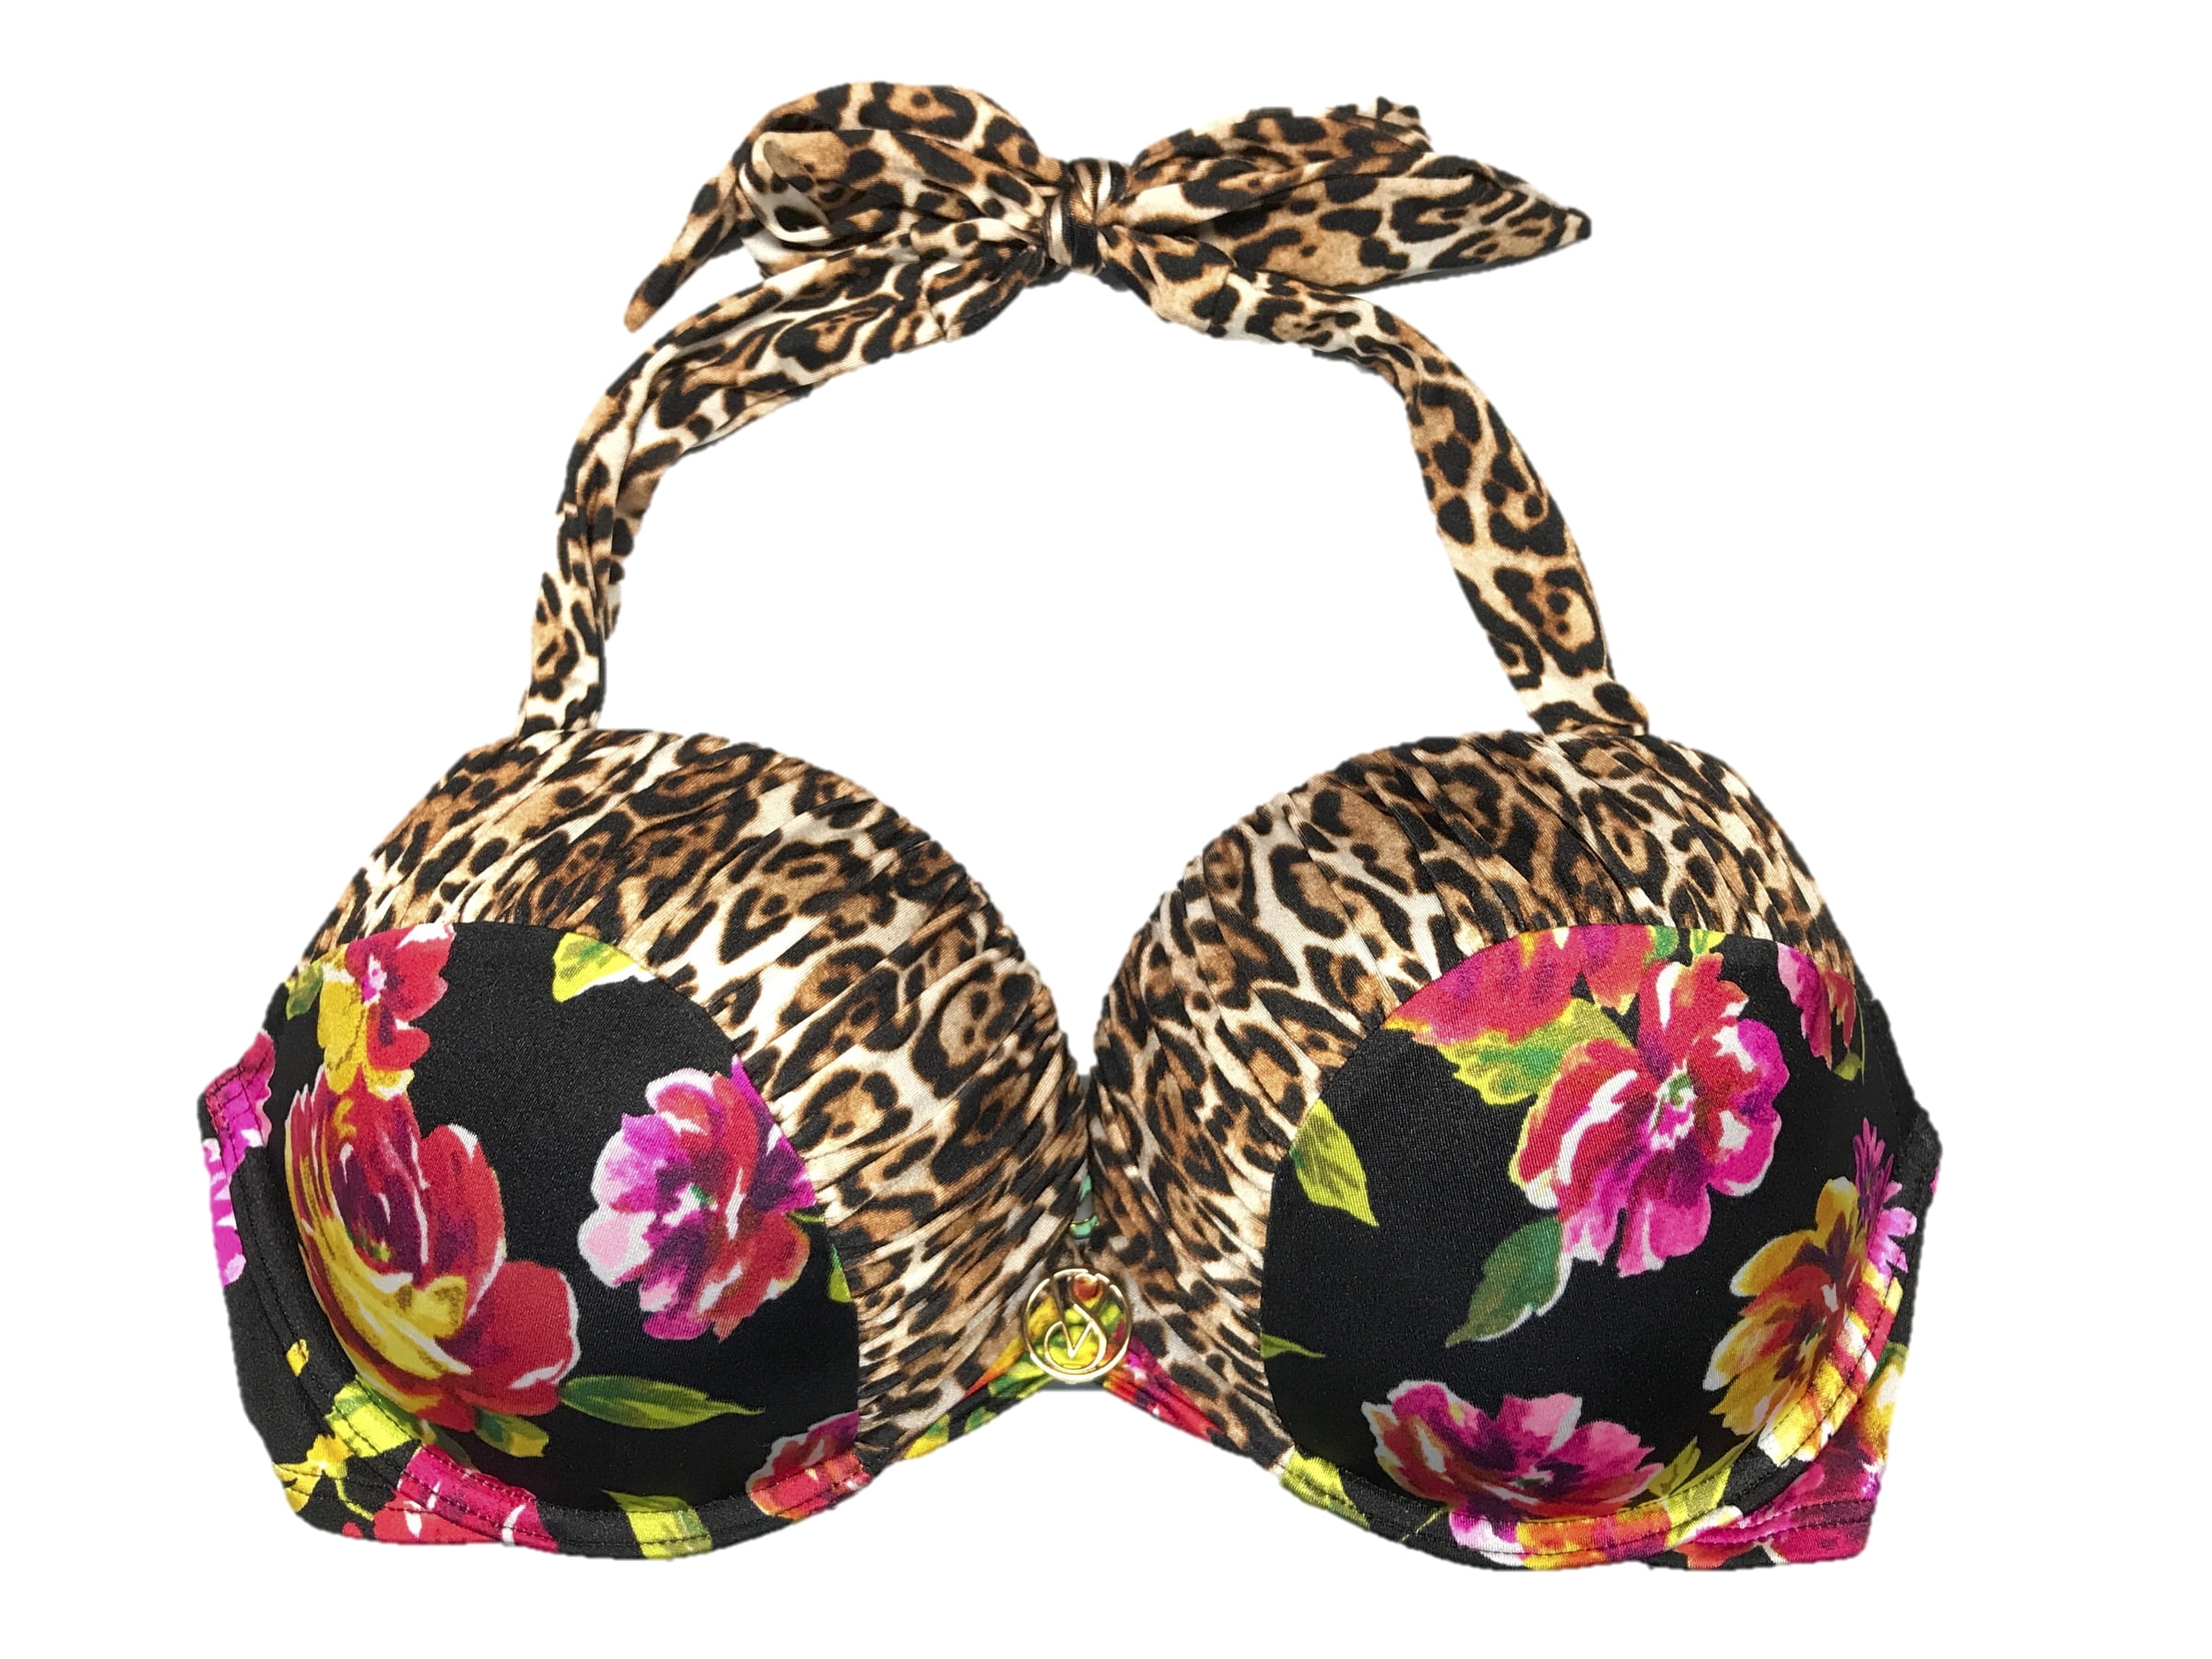 Victoria's Secret Victoria Secret 38C Bombshell bikini top Size undefined -  $46 New With Tags - From Shoptillyoudrop